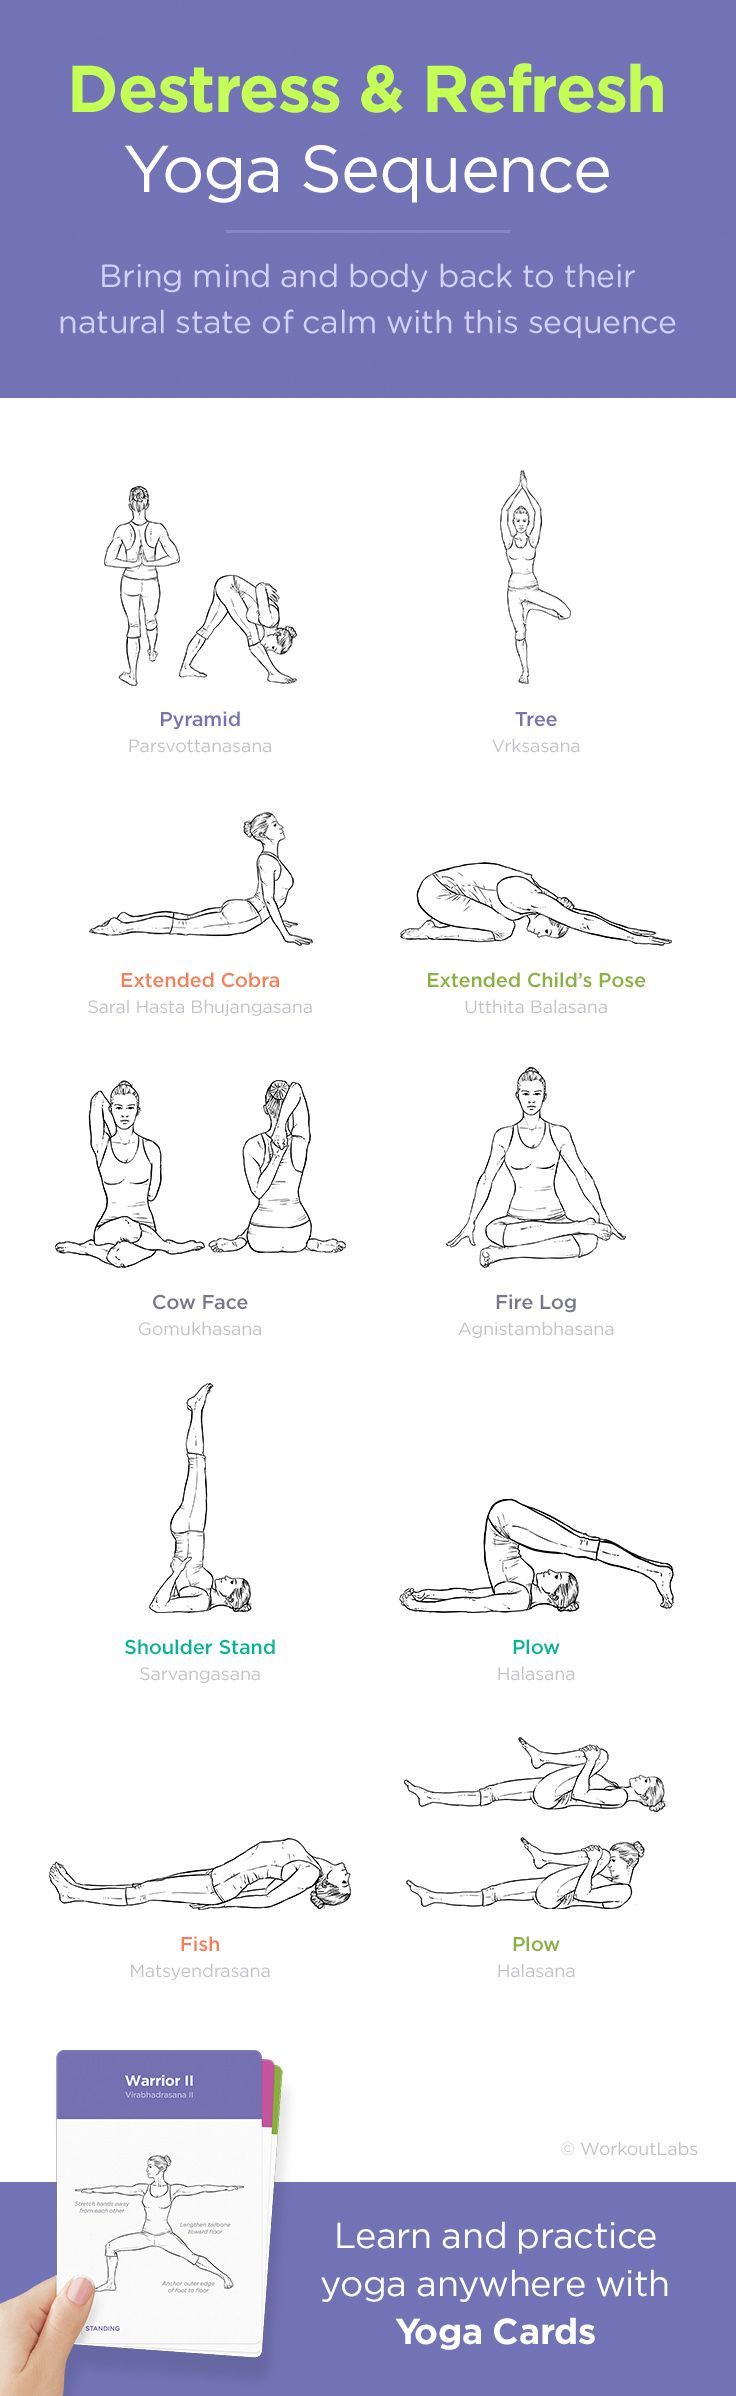 Bring mind and body back to their natural state of calm with this yoga sequence...